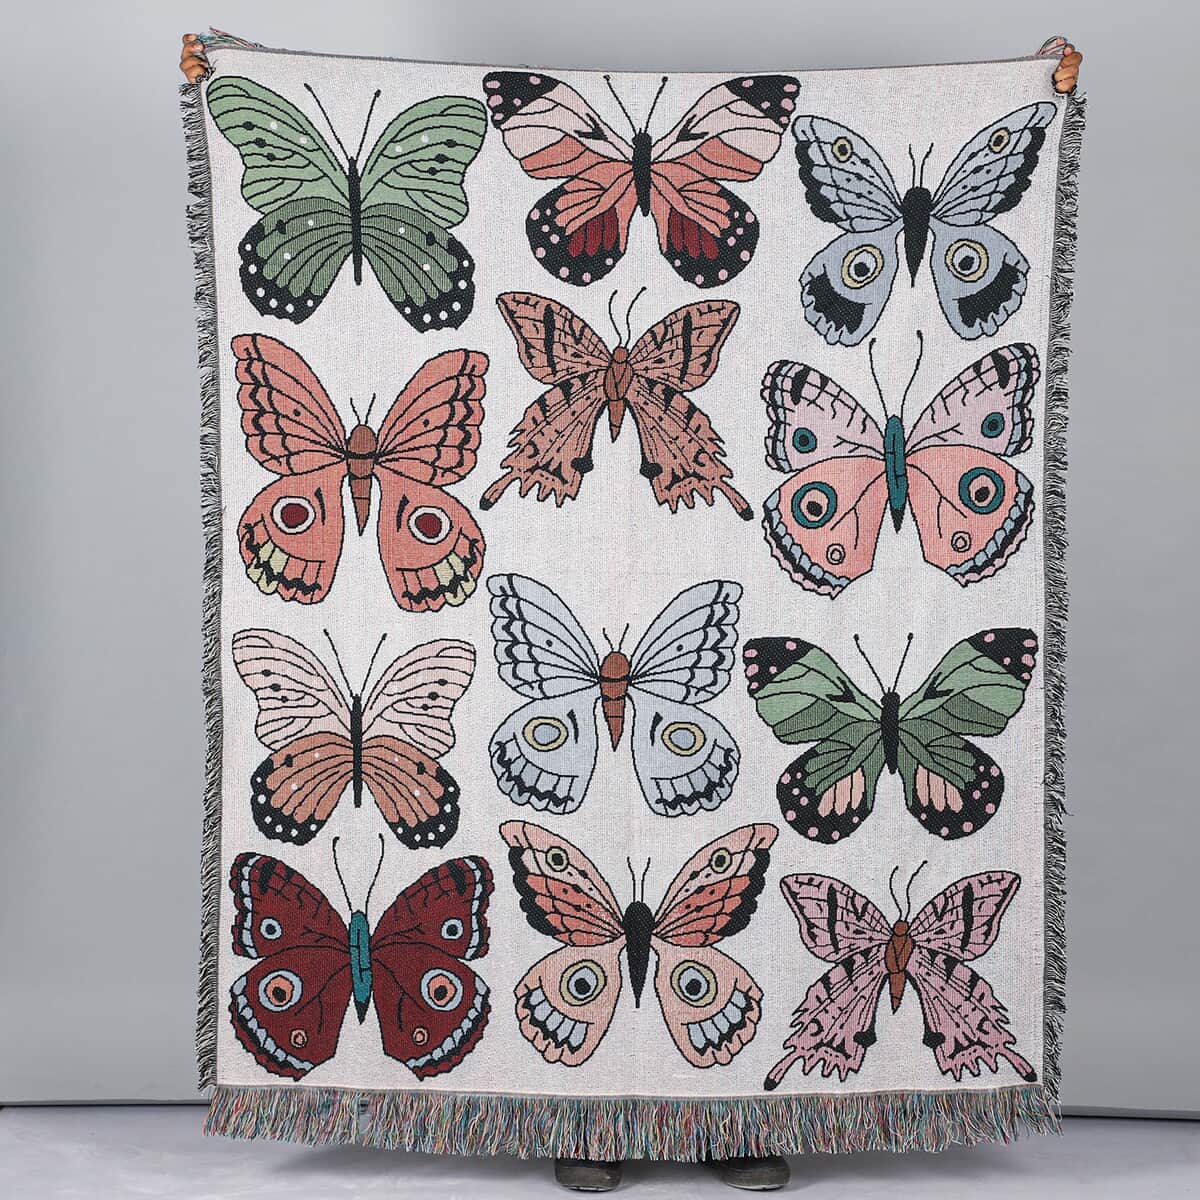 Multi Color Jacquard Butterfly Woven Printed Cotton Throw with Fringes (50"x60") 1.65lbs image number 0